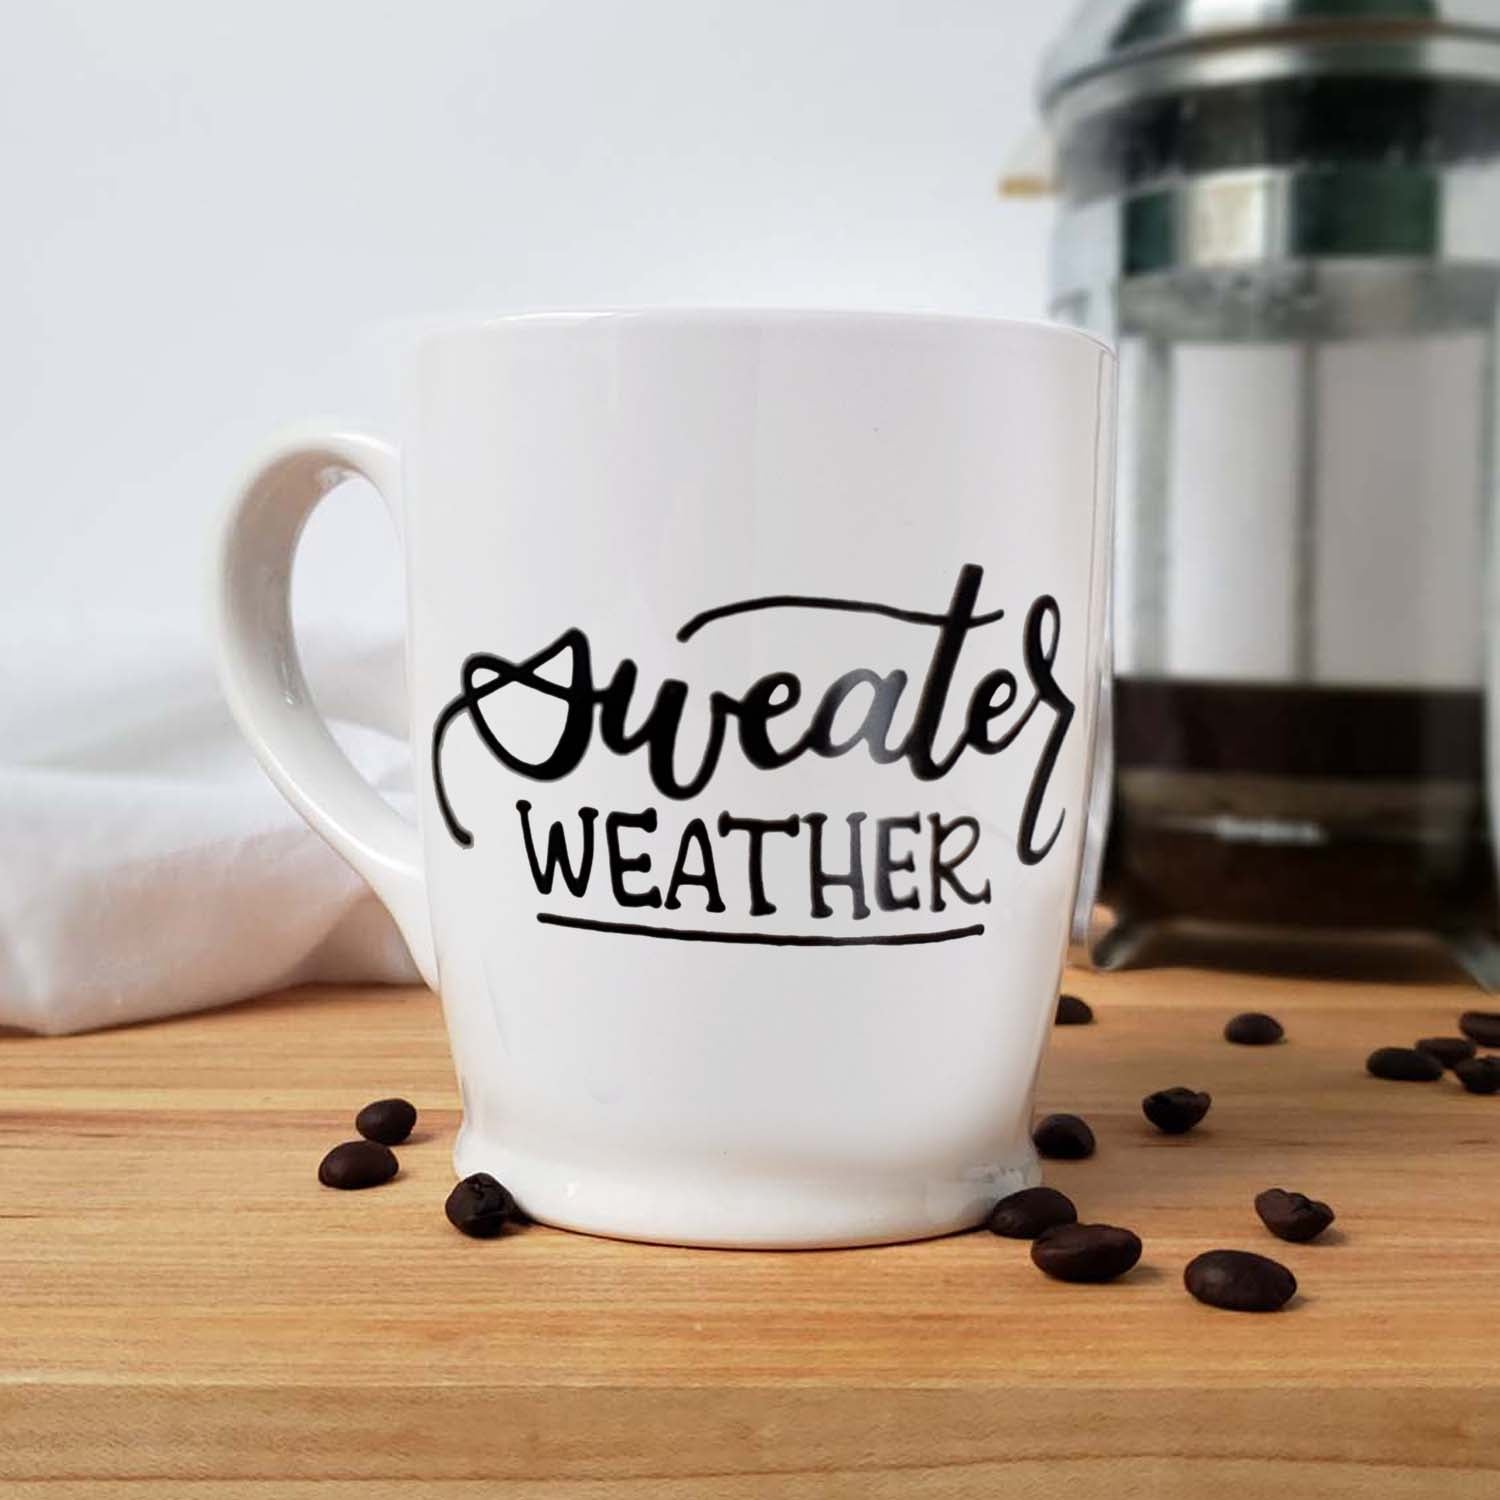 Hand painted white ceramic mug that says sweater weather in black hand lettering shown on a kitchen counter with a french press, towel and scattered coffee beans